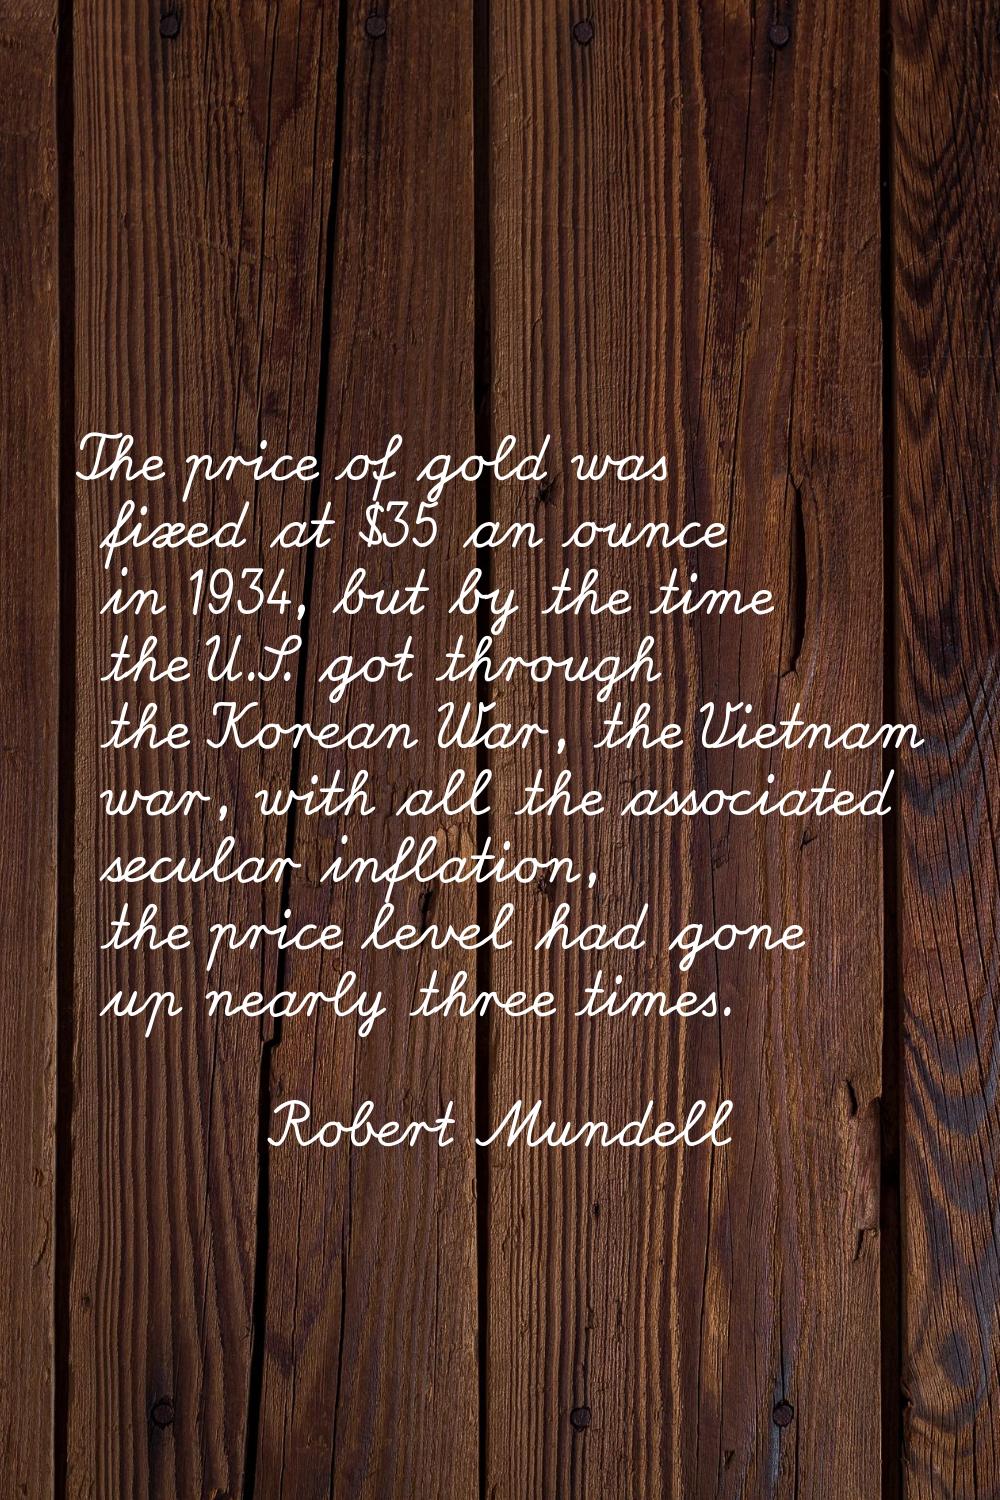 The price of gold was fixed at $35 an ounce in 1934, but by the time the U.S. got through the Korea